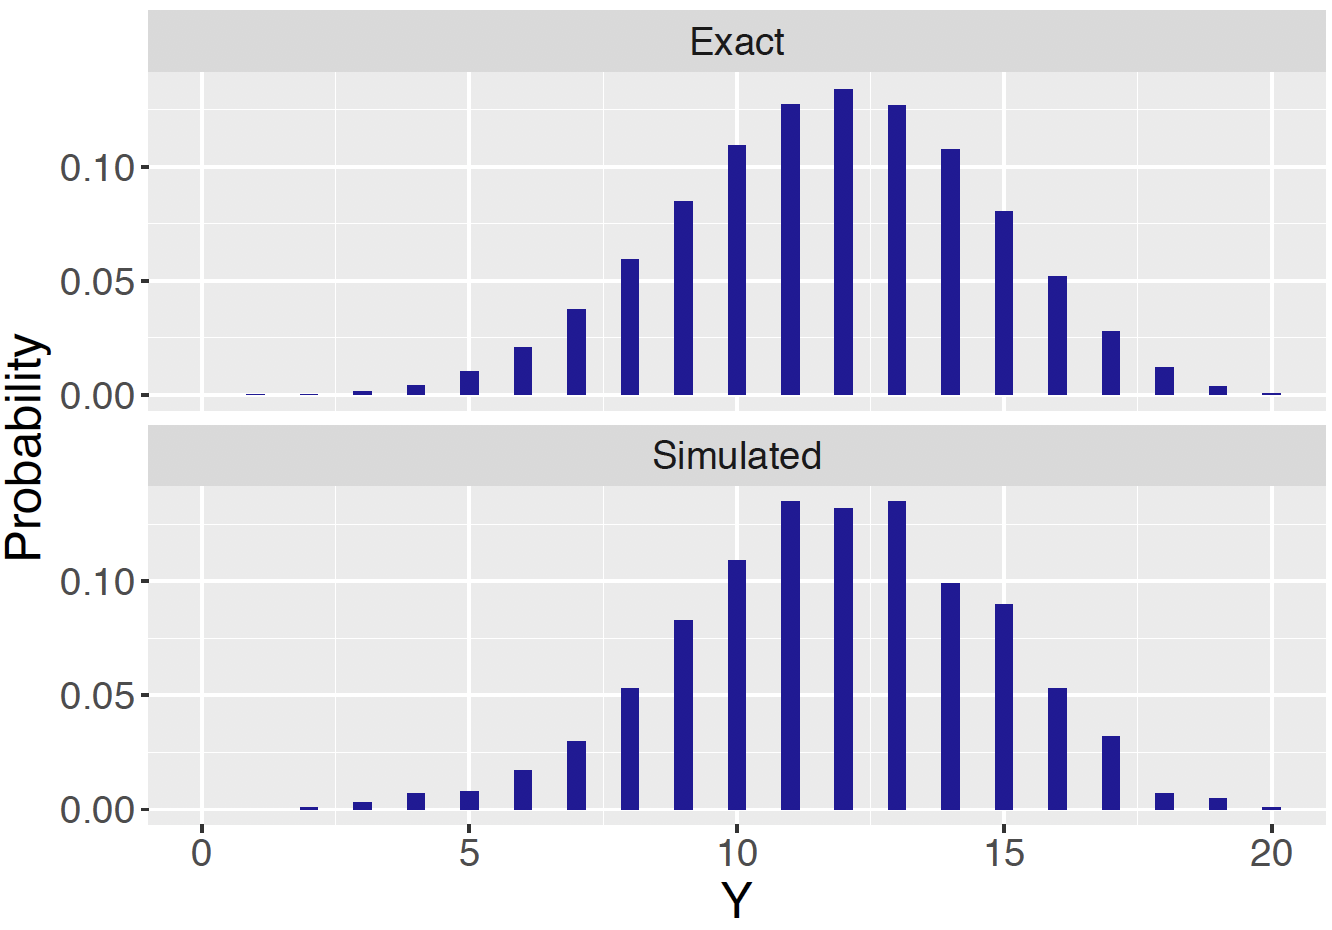 Display of the exact and simulated predictive probabilities for dining example.